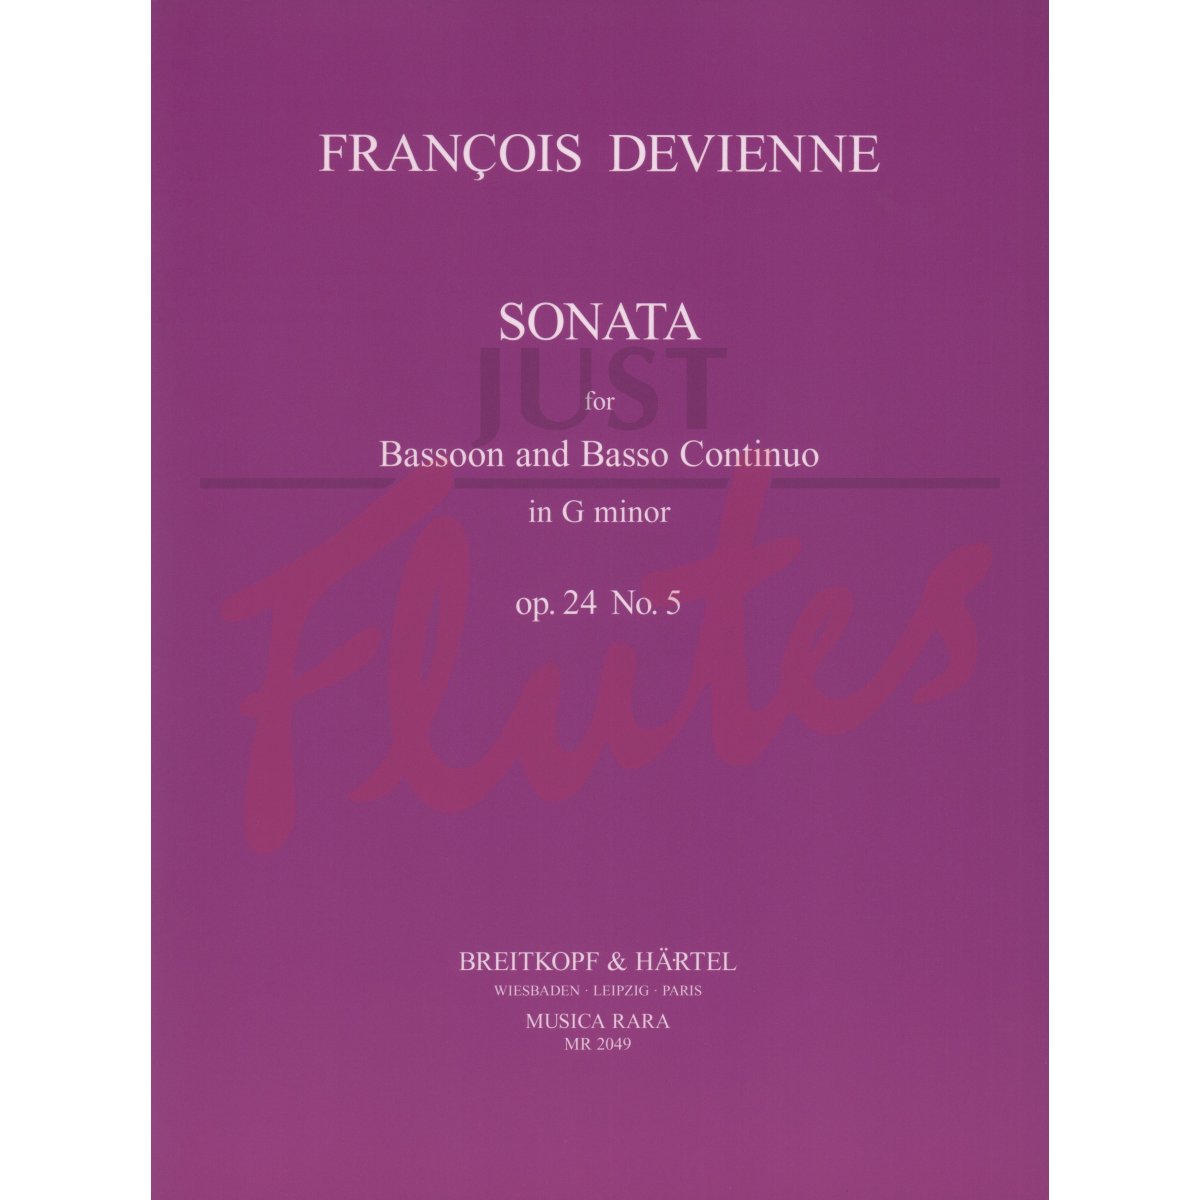 Sonata in G minor for Bassoon and Basso Continuo